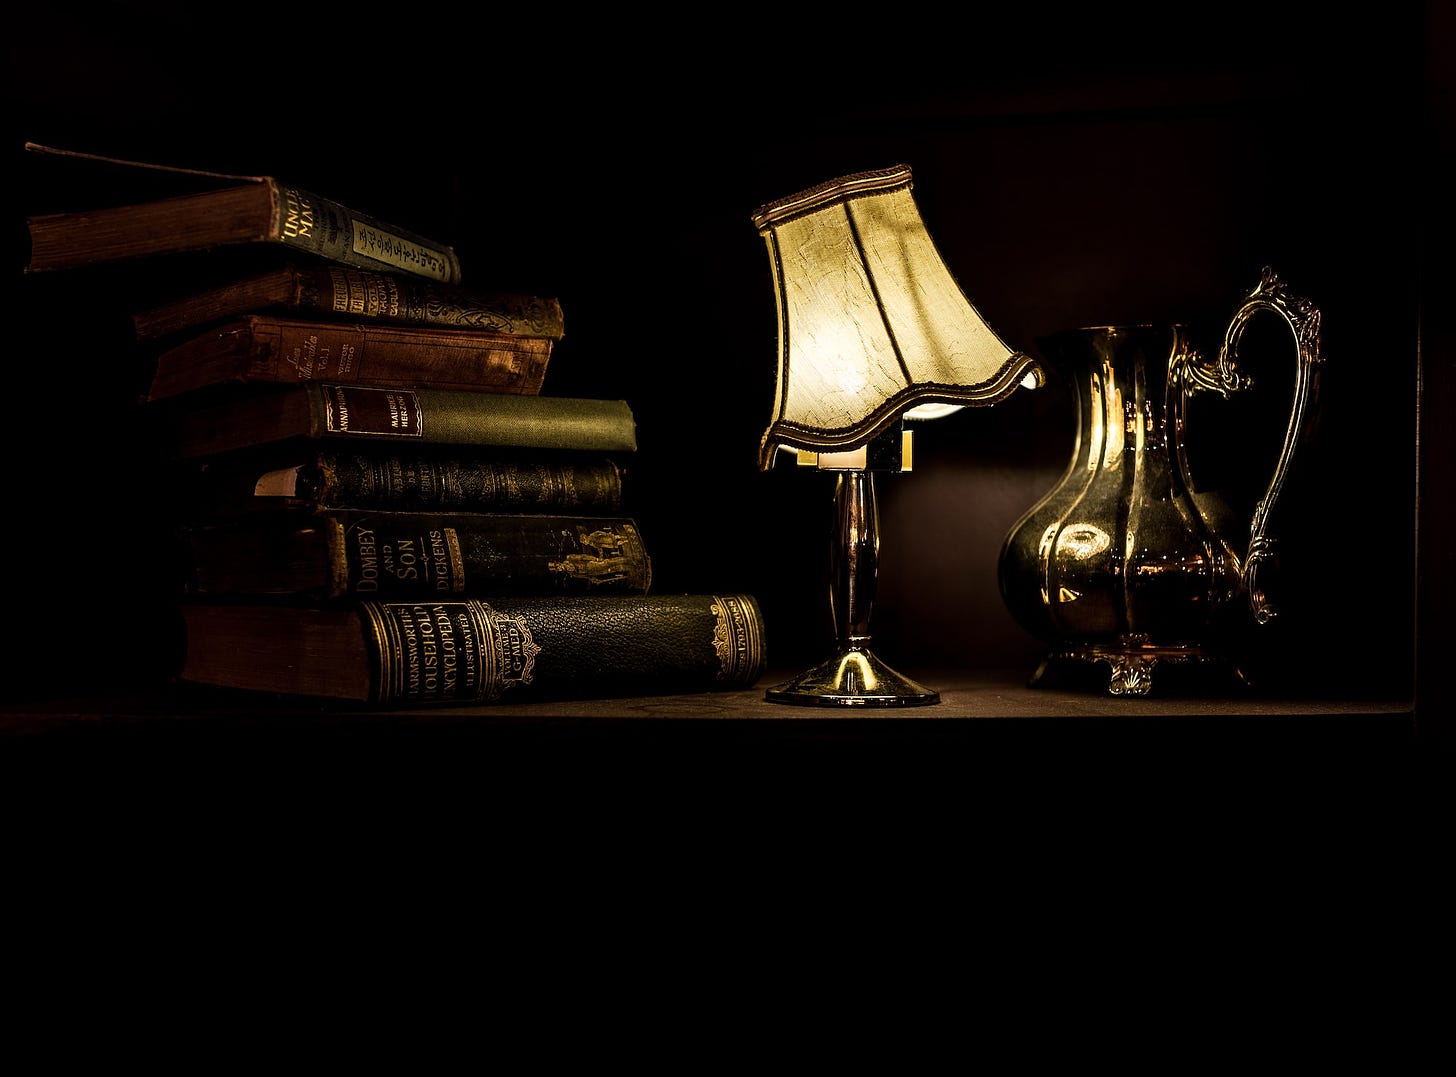 Vintage lamp and books